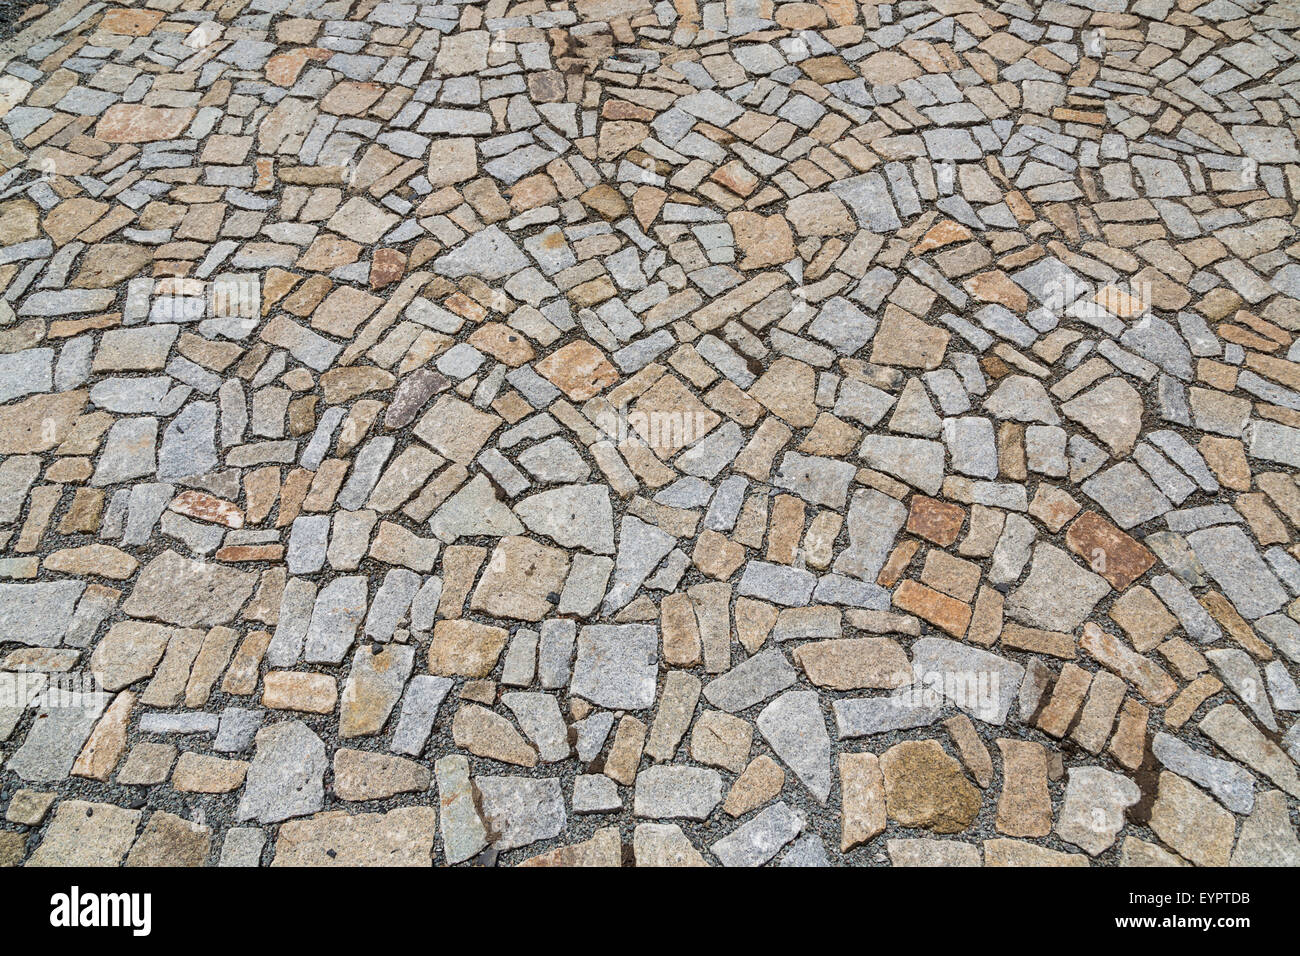 The stone pavement as the background texture, Stone block road pavement Stock Photo